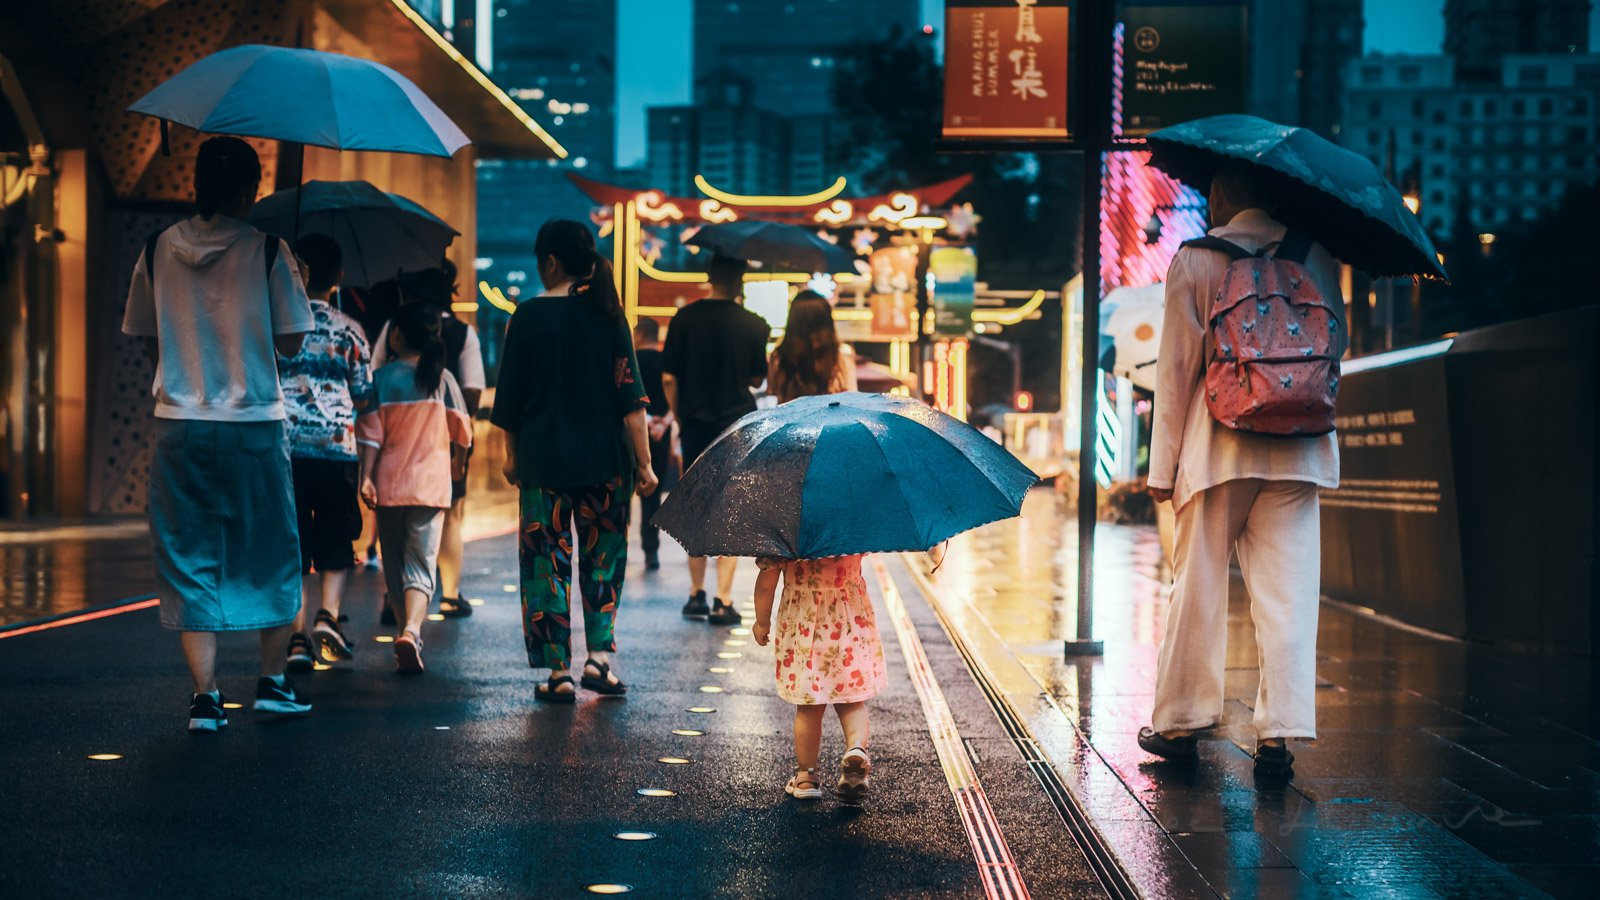 Little girl with a big umbrella wlaking with people under the rain at night in the city, Chengdu, Sichuan province, China